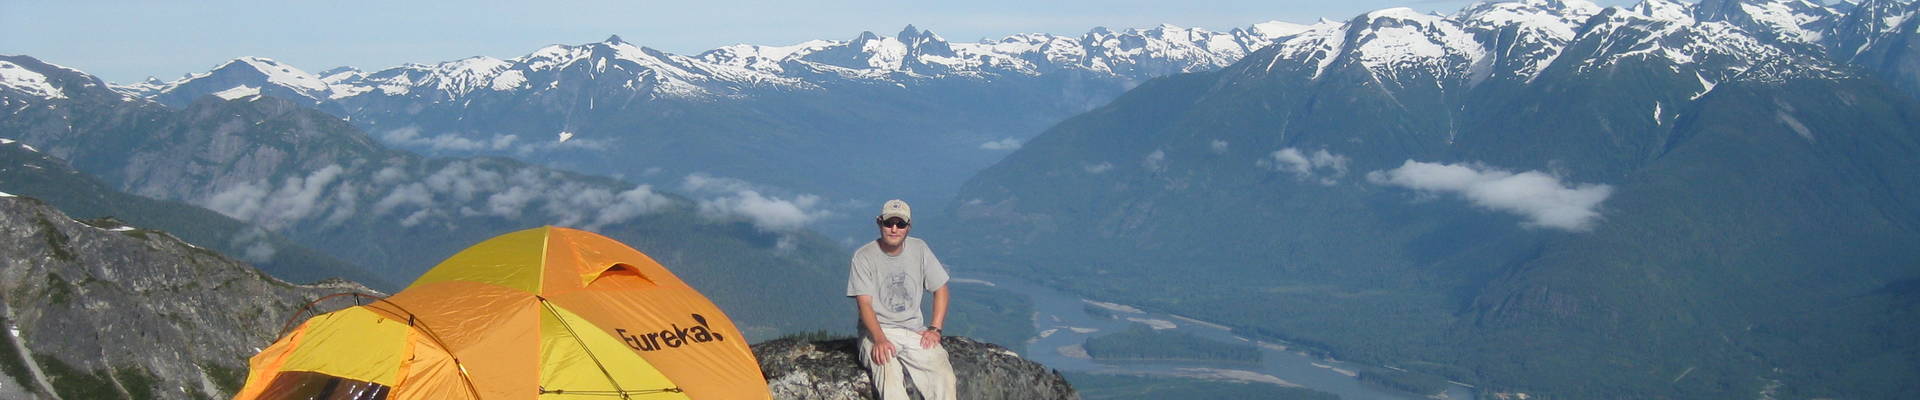 Geology research British Columbia